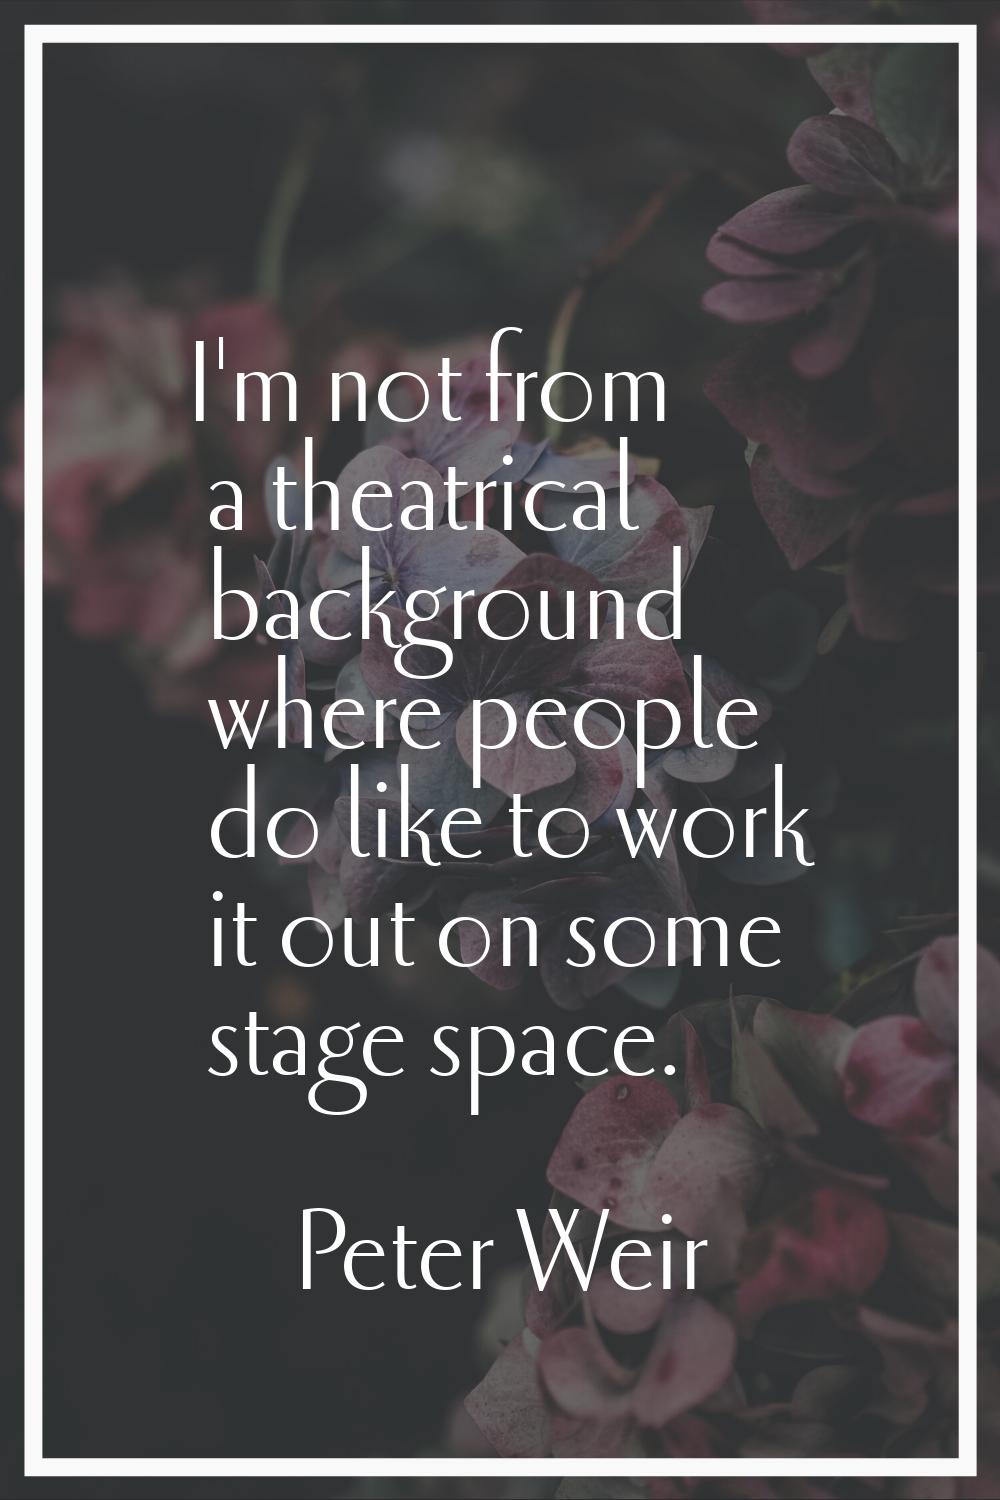 I'm not from a theatrical background where people do like to work it out on some stage space.